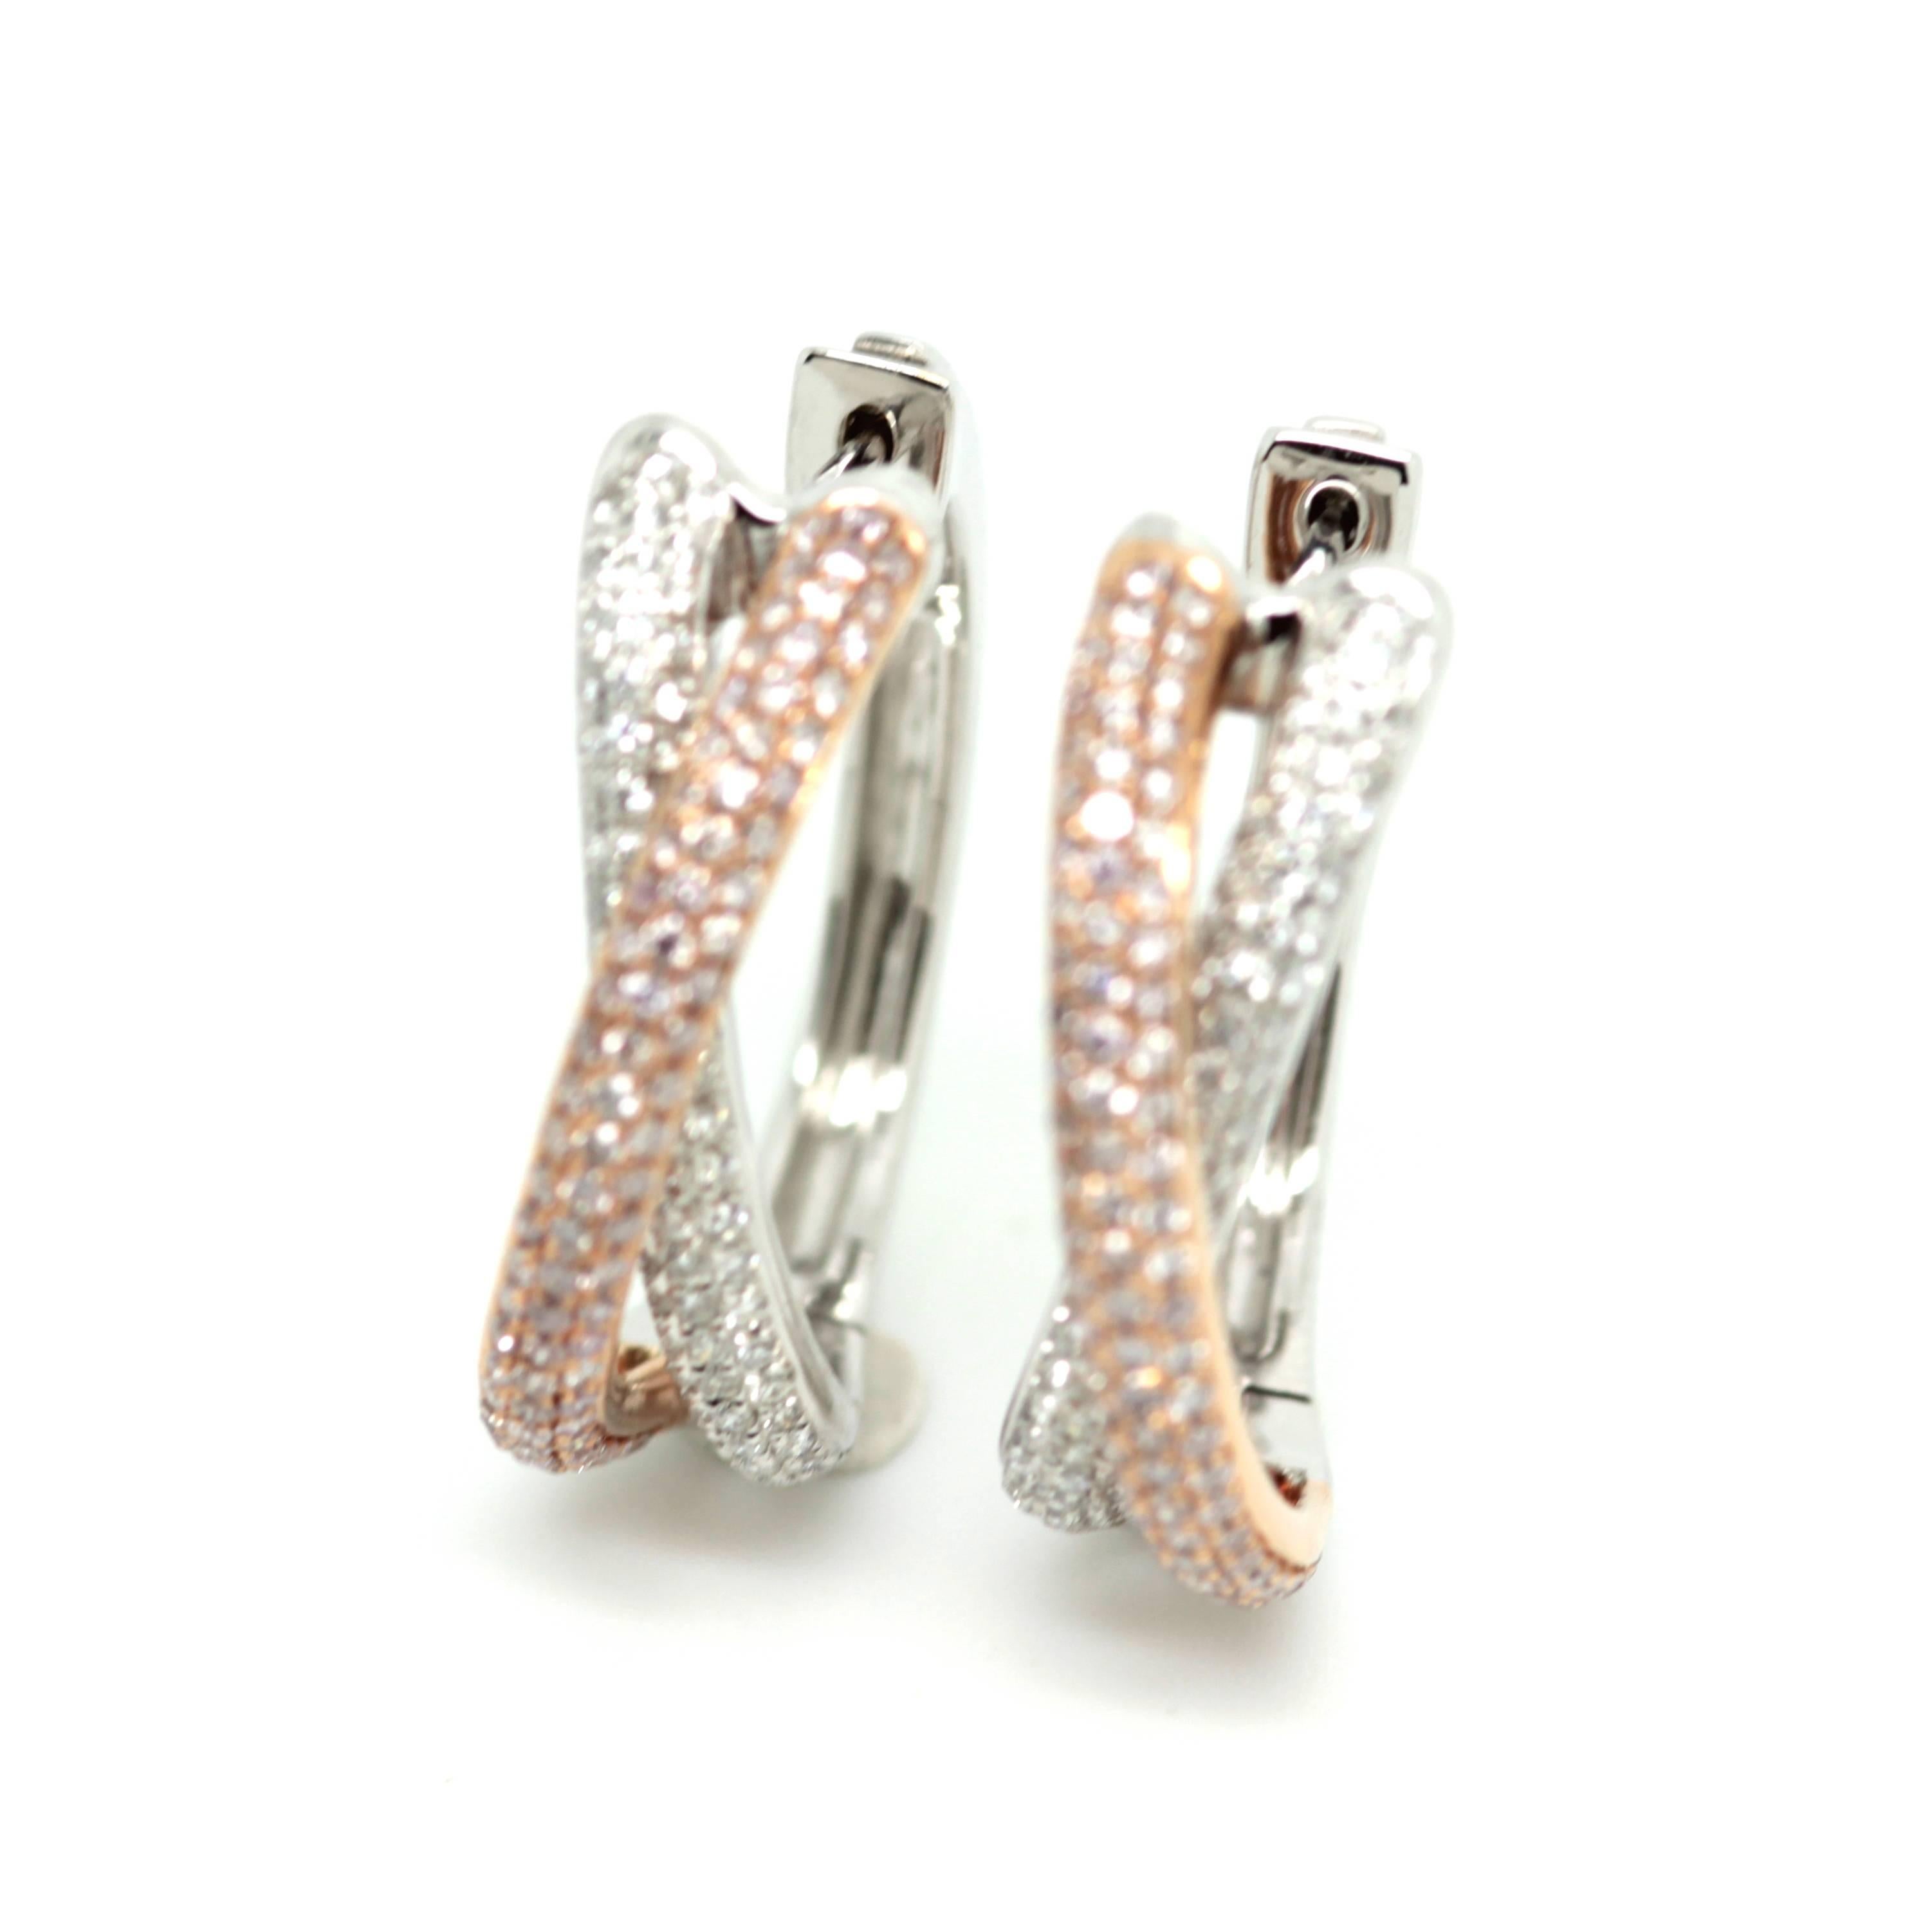 Natural  1.13ct fancy pink and white diamond hoop stud earrings set in 18k white and rose gold.  
